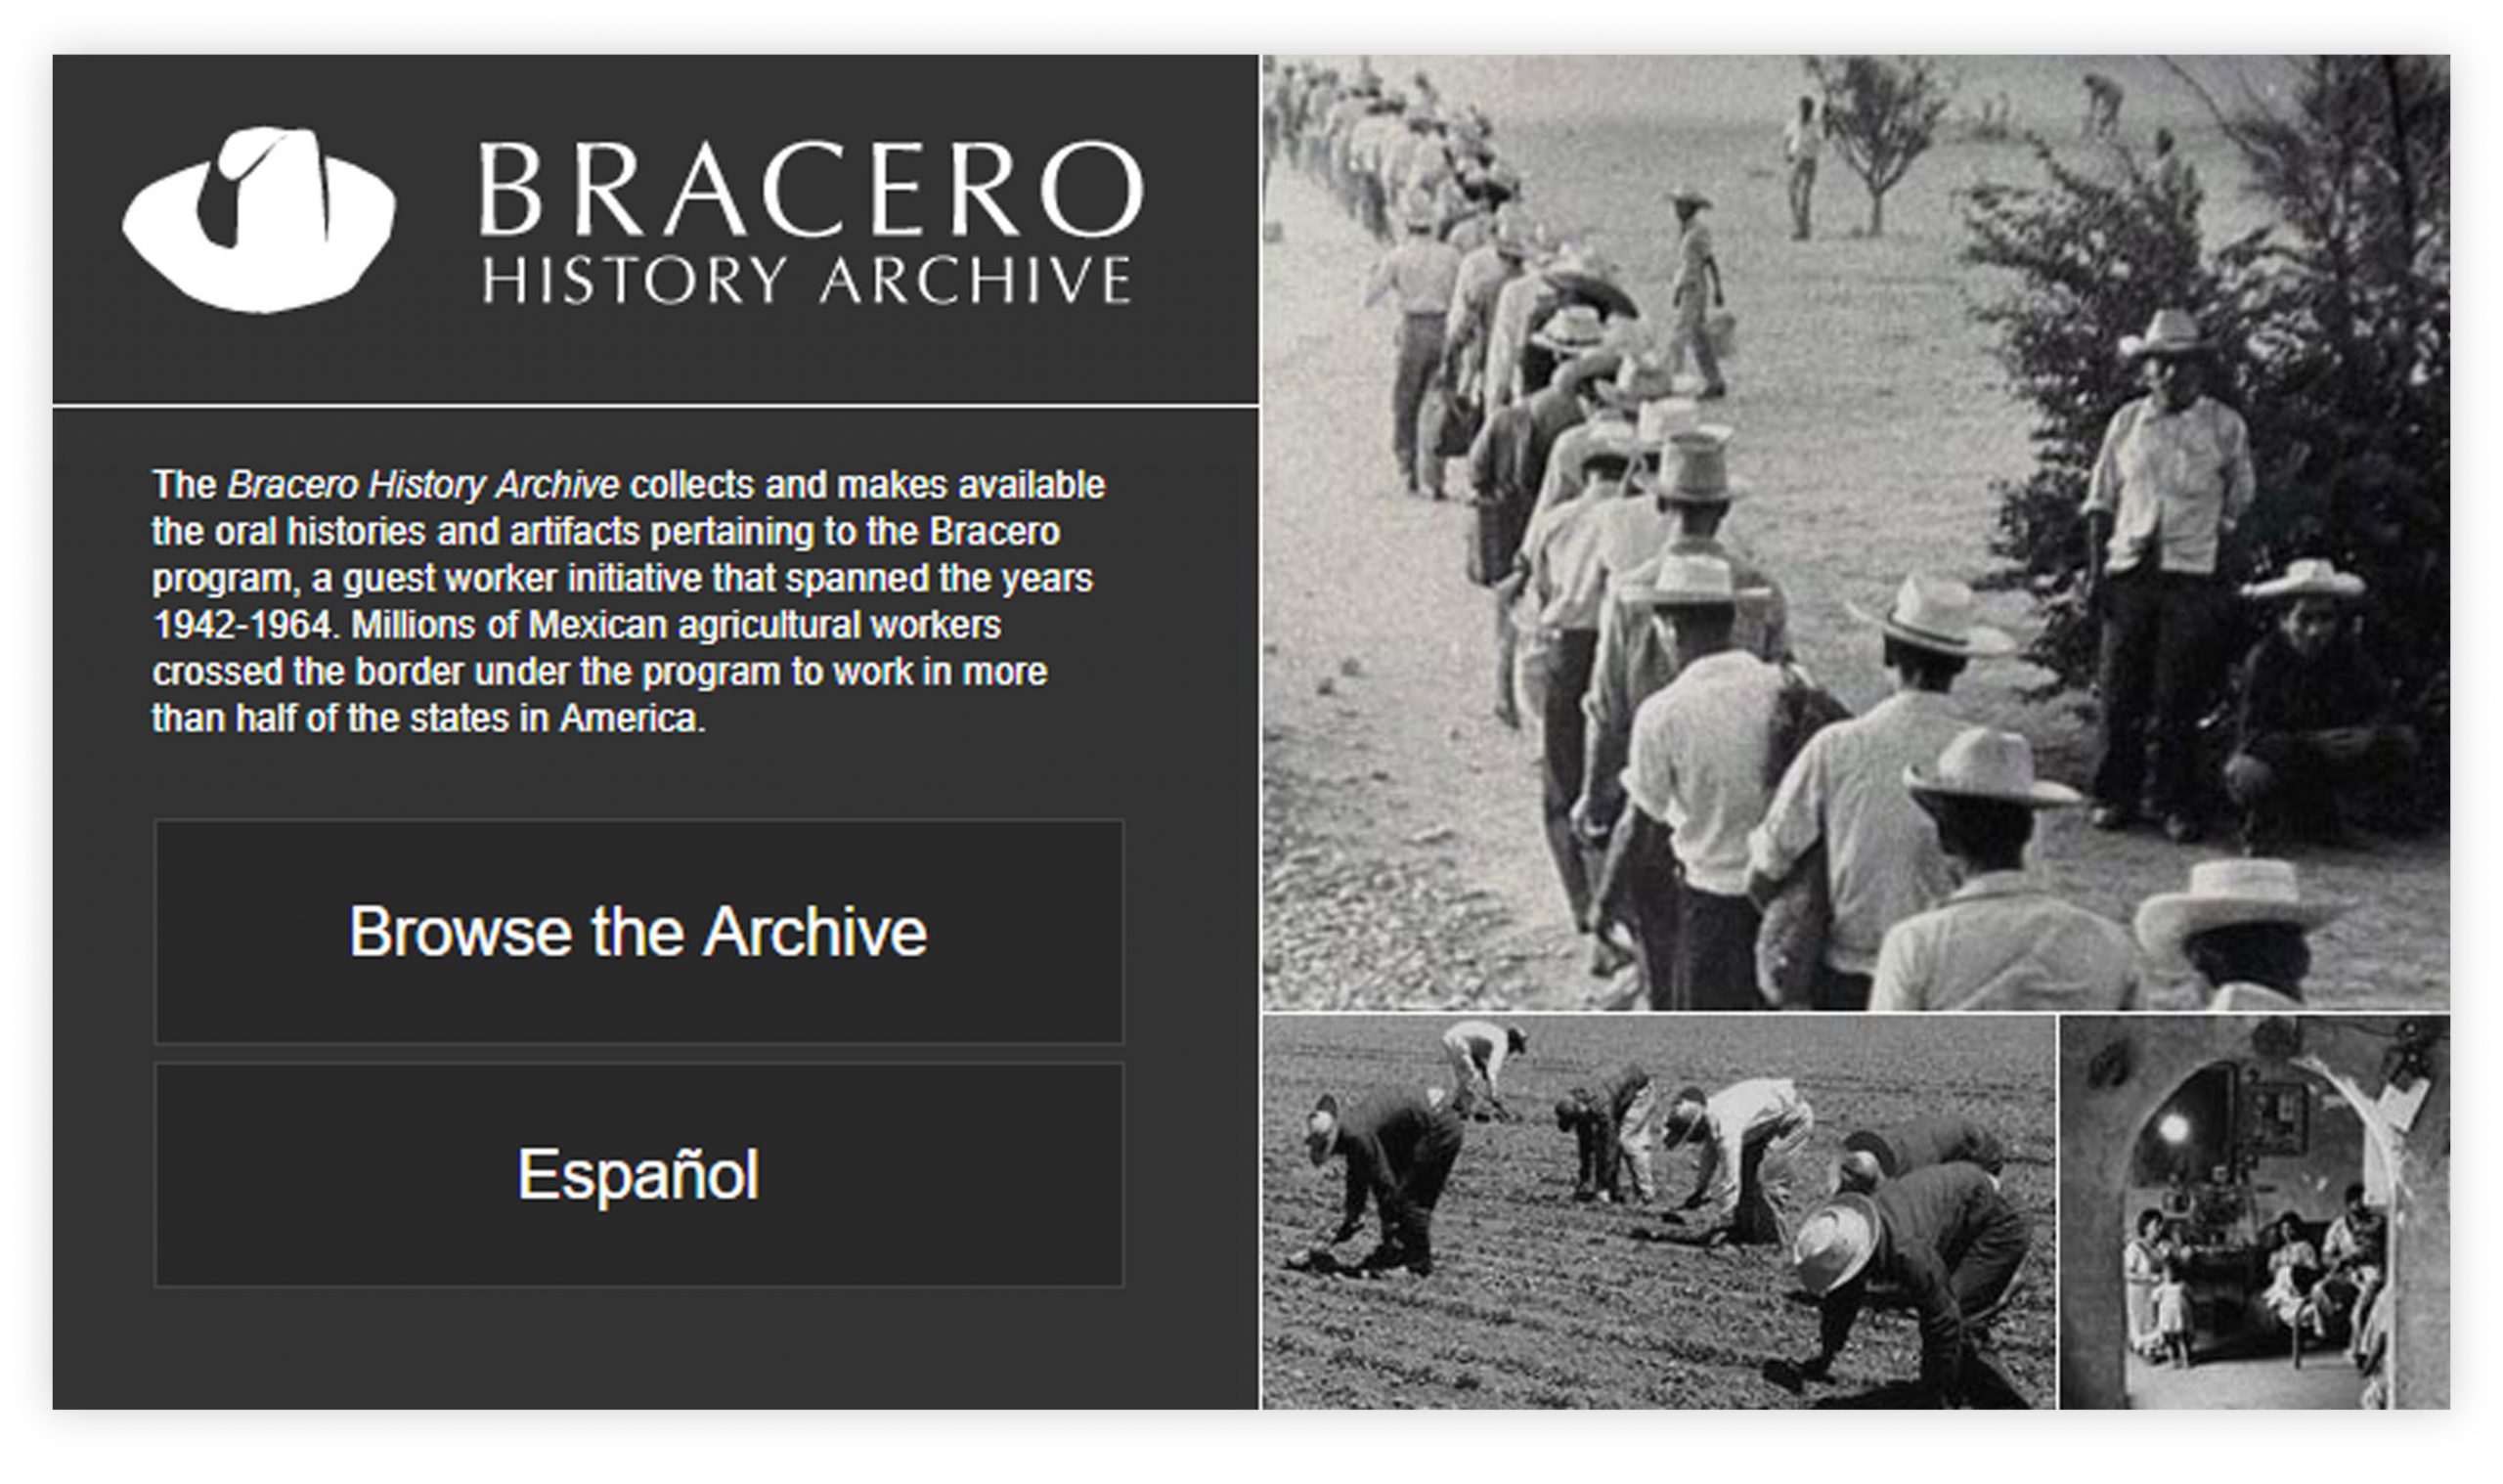 Screengrab of the Bracero History Archive website landing page.